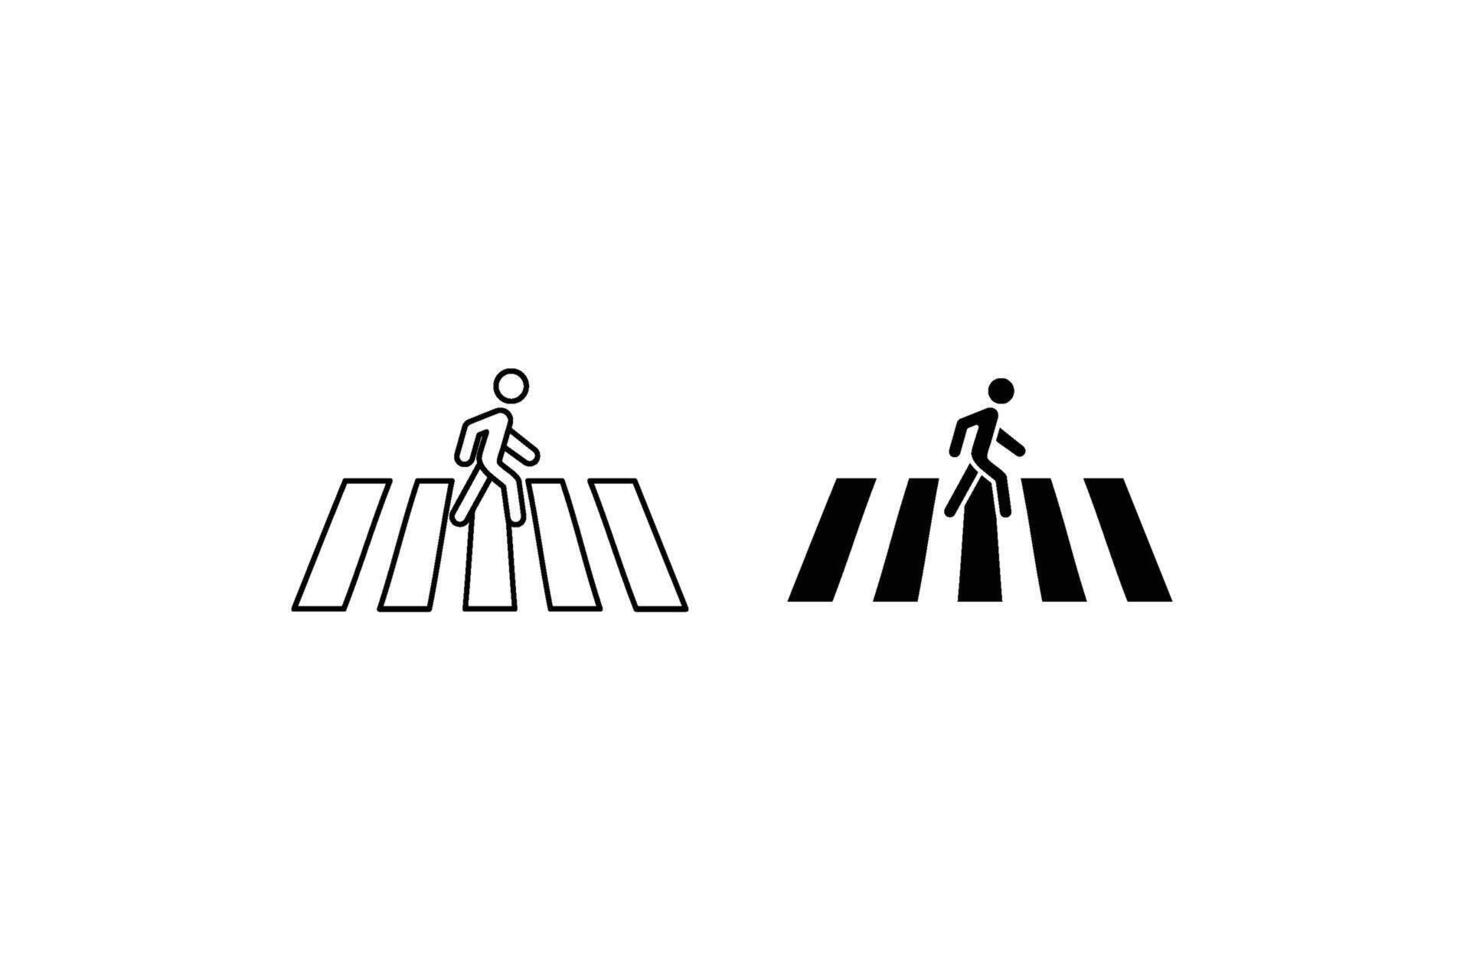 Crosswalk icon. Pedestrian crossing icon illustration isolated on white background vector